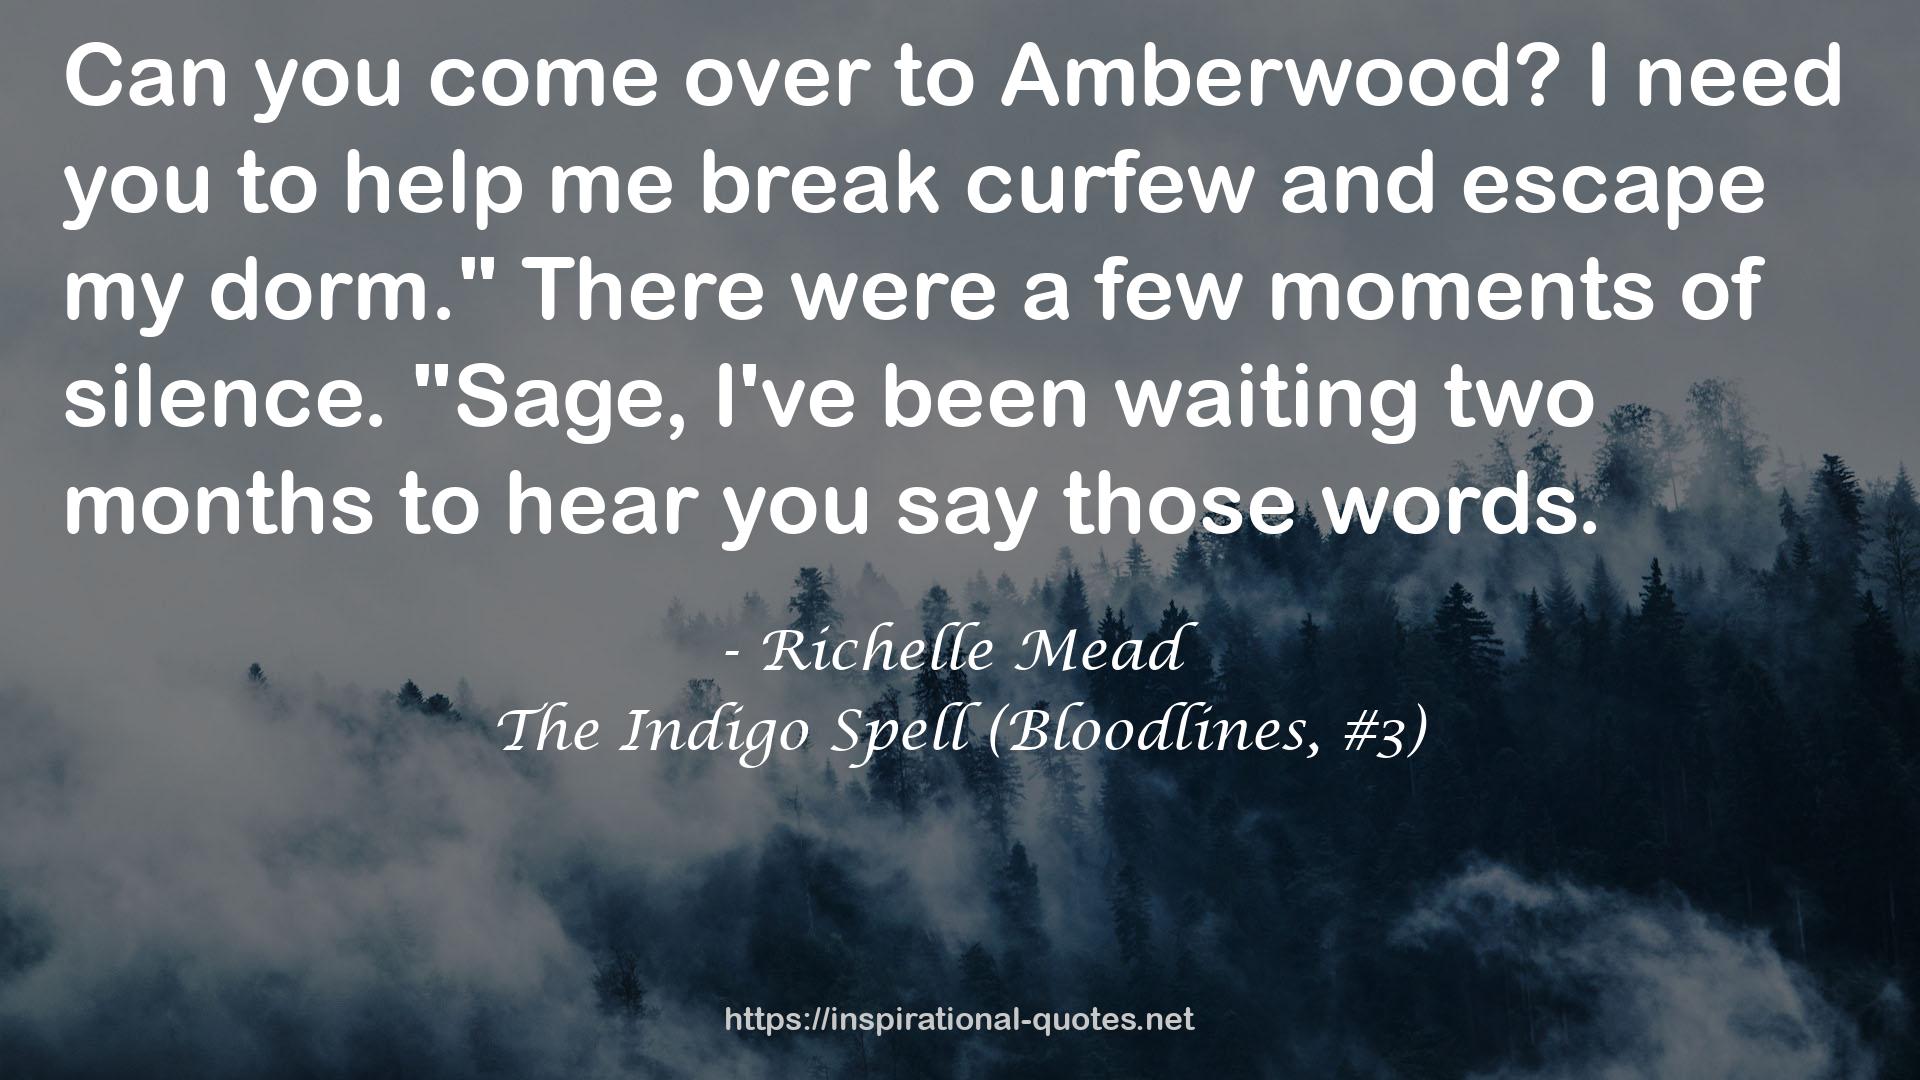 The Indigo Spell (Bloodlines, #3) QUOTES